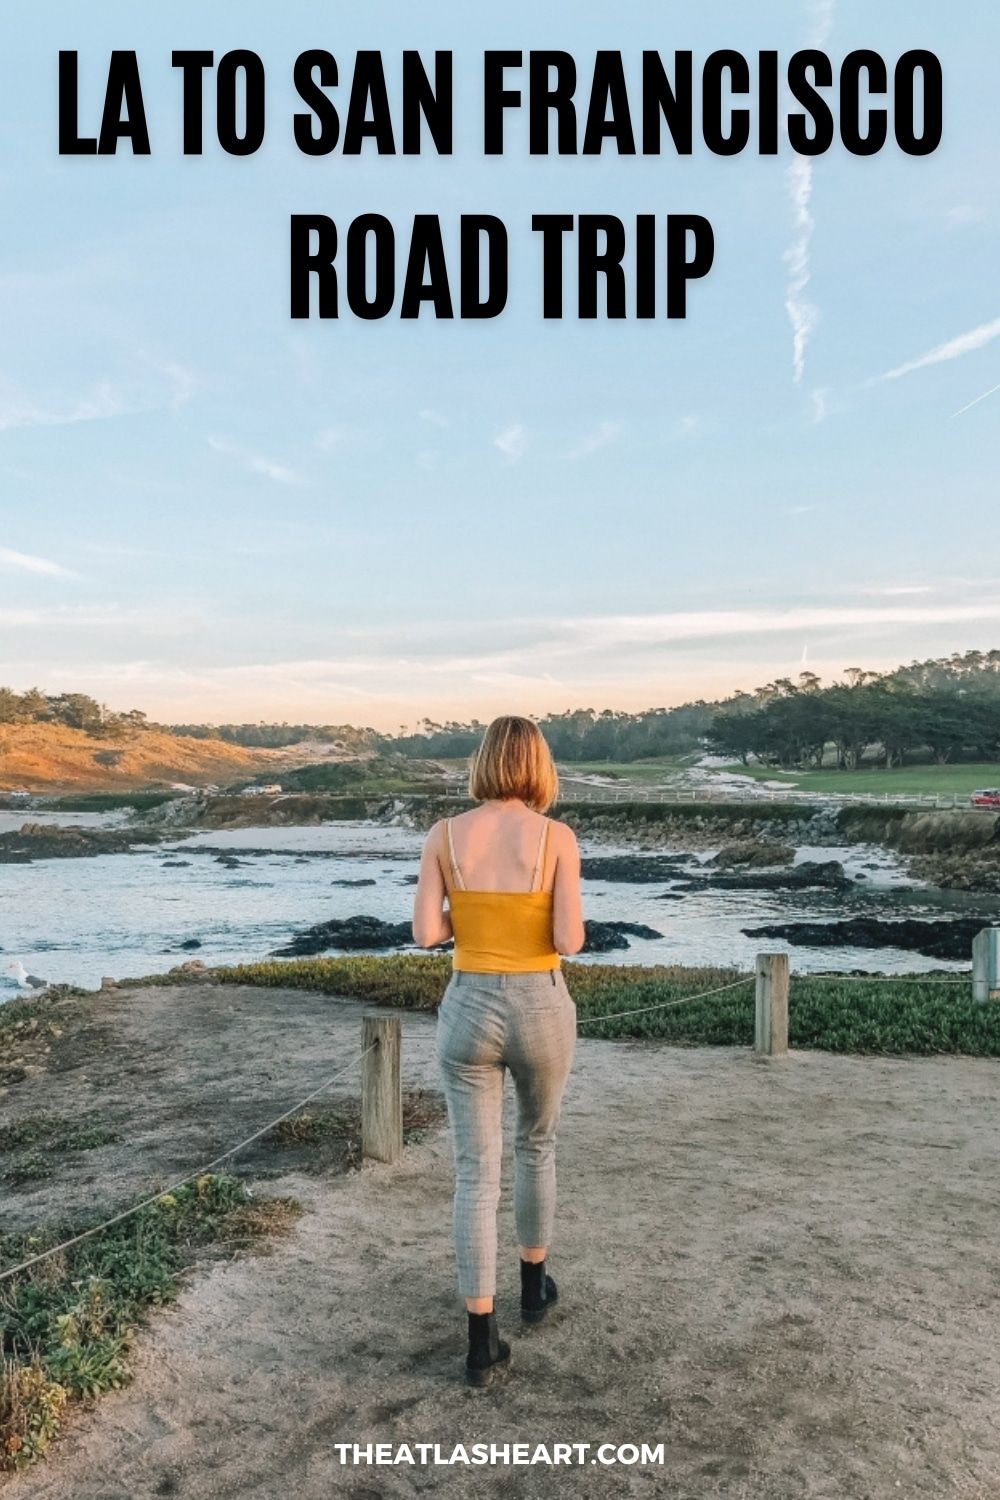 LA to San Francisco Road Trip: Recommended Stops, Planning Tips, and Sample Itineraries